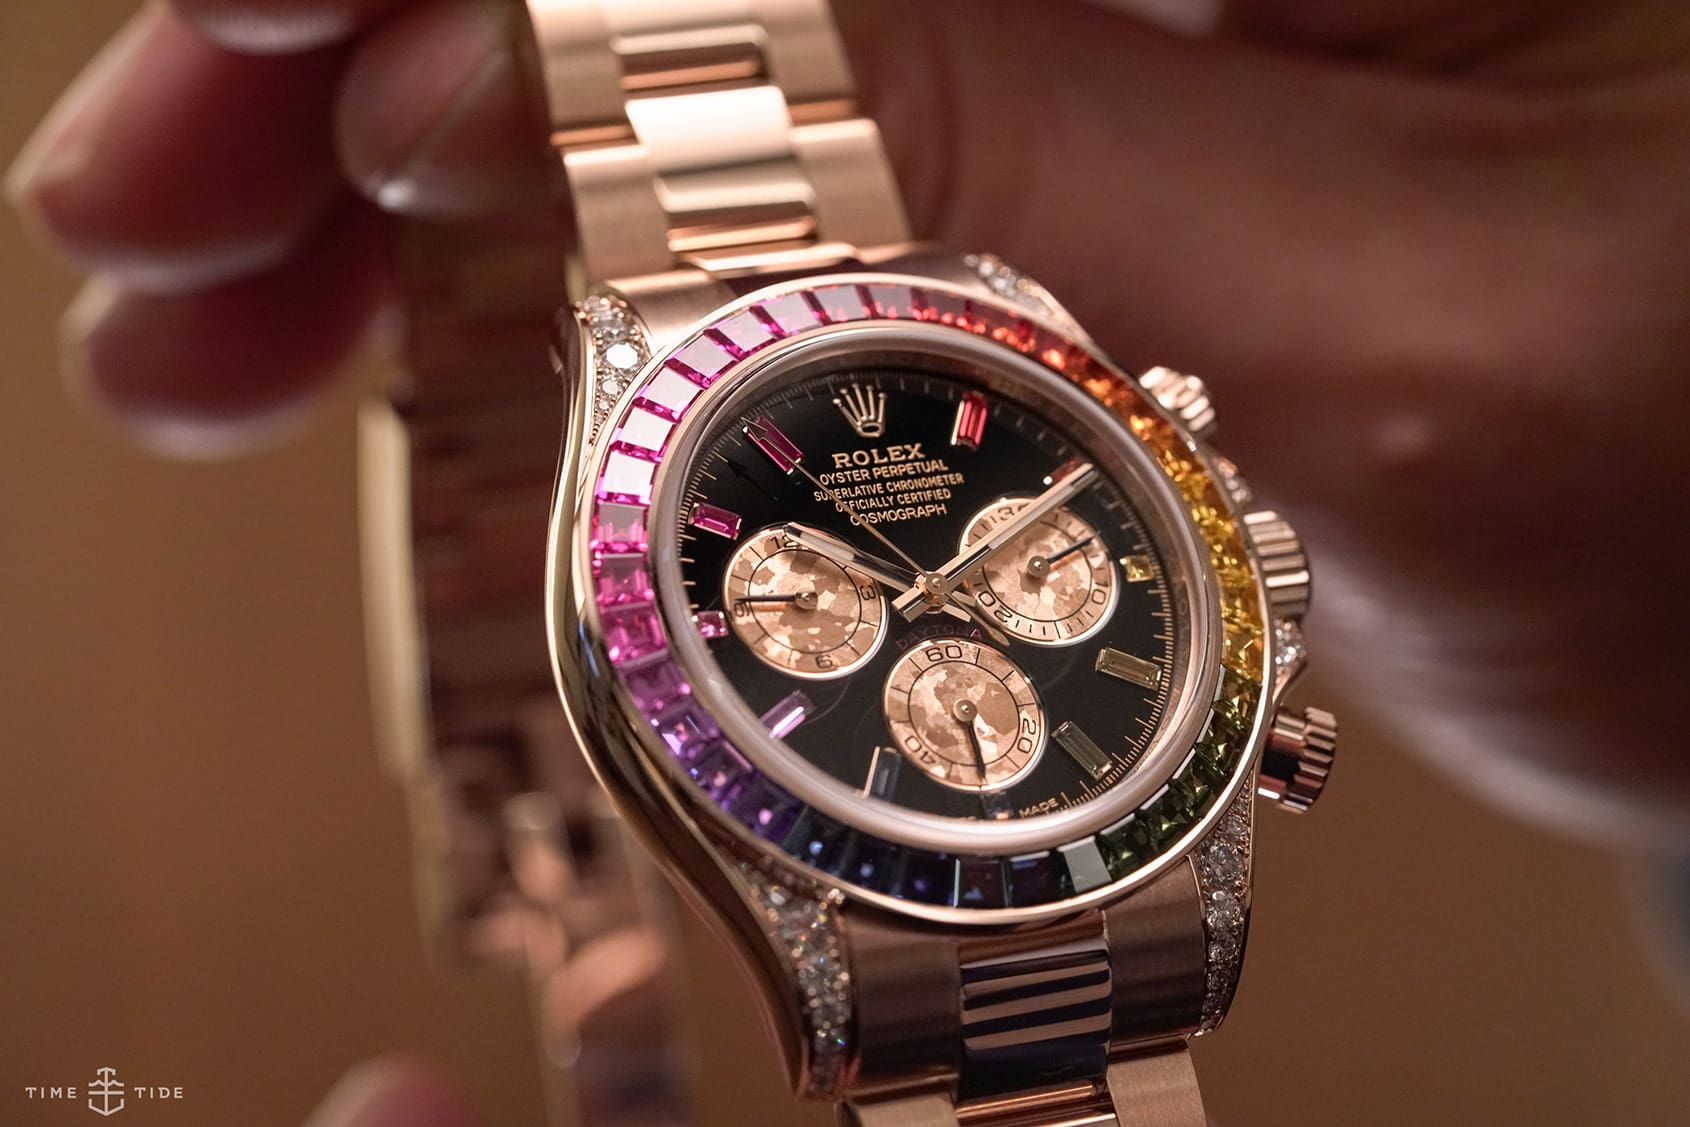 An owner's guide: Does the Rolex Oyster Perpetual deserve the hype?